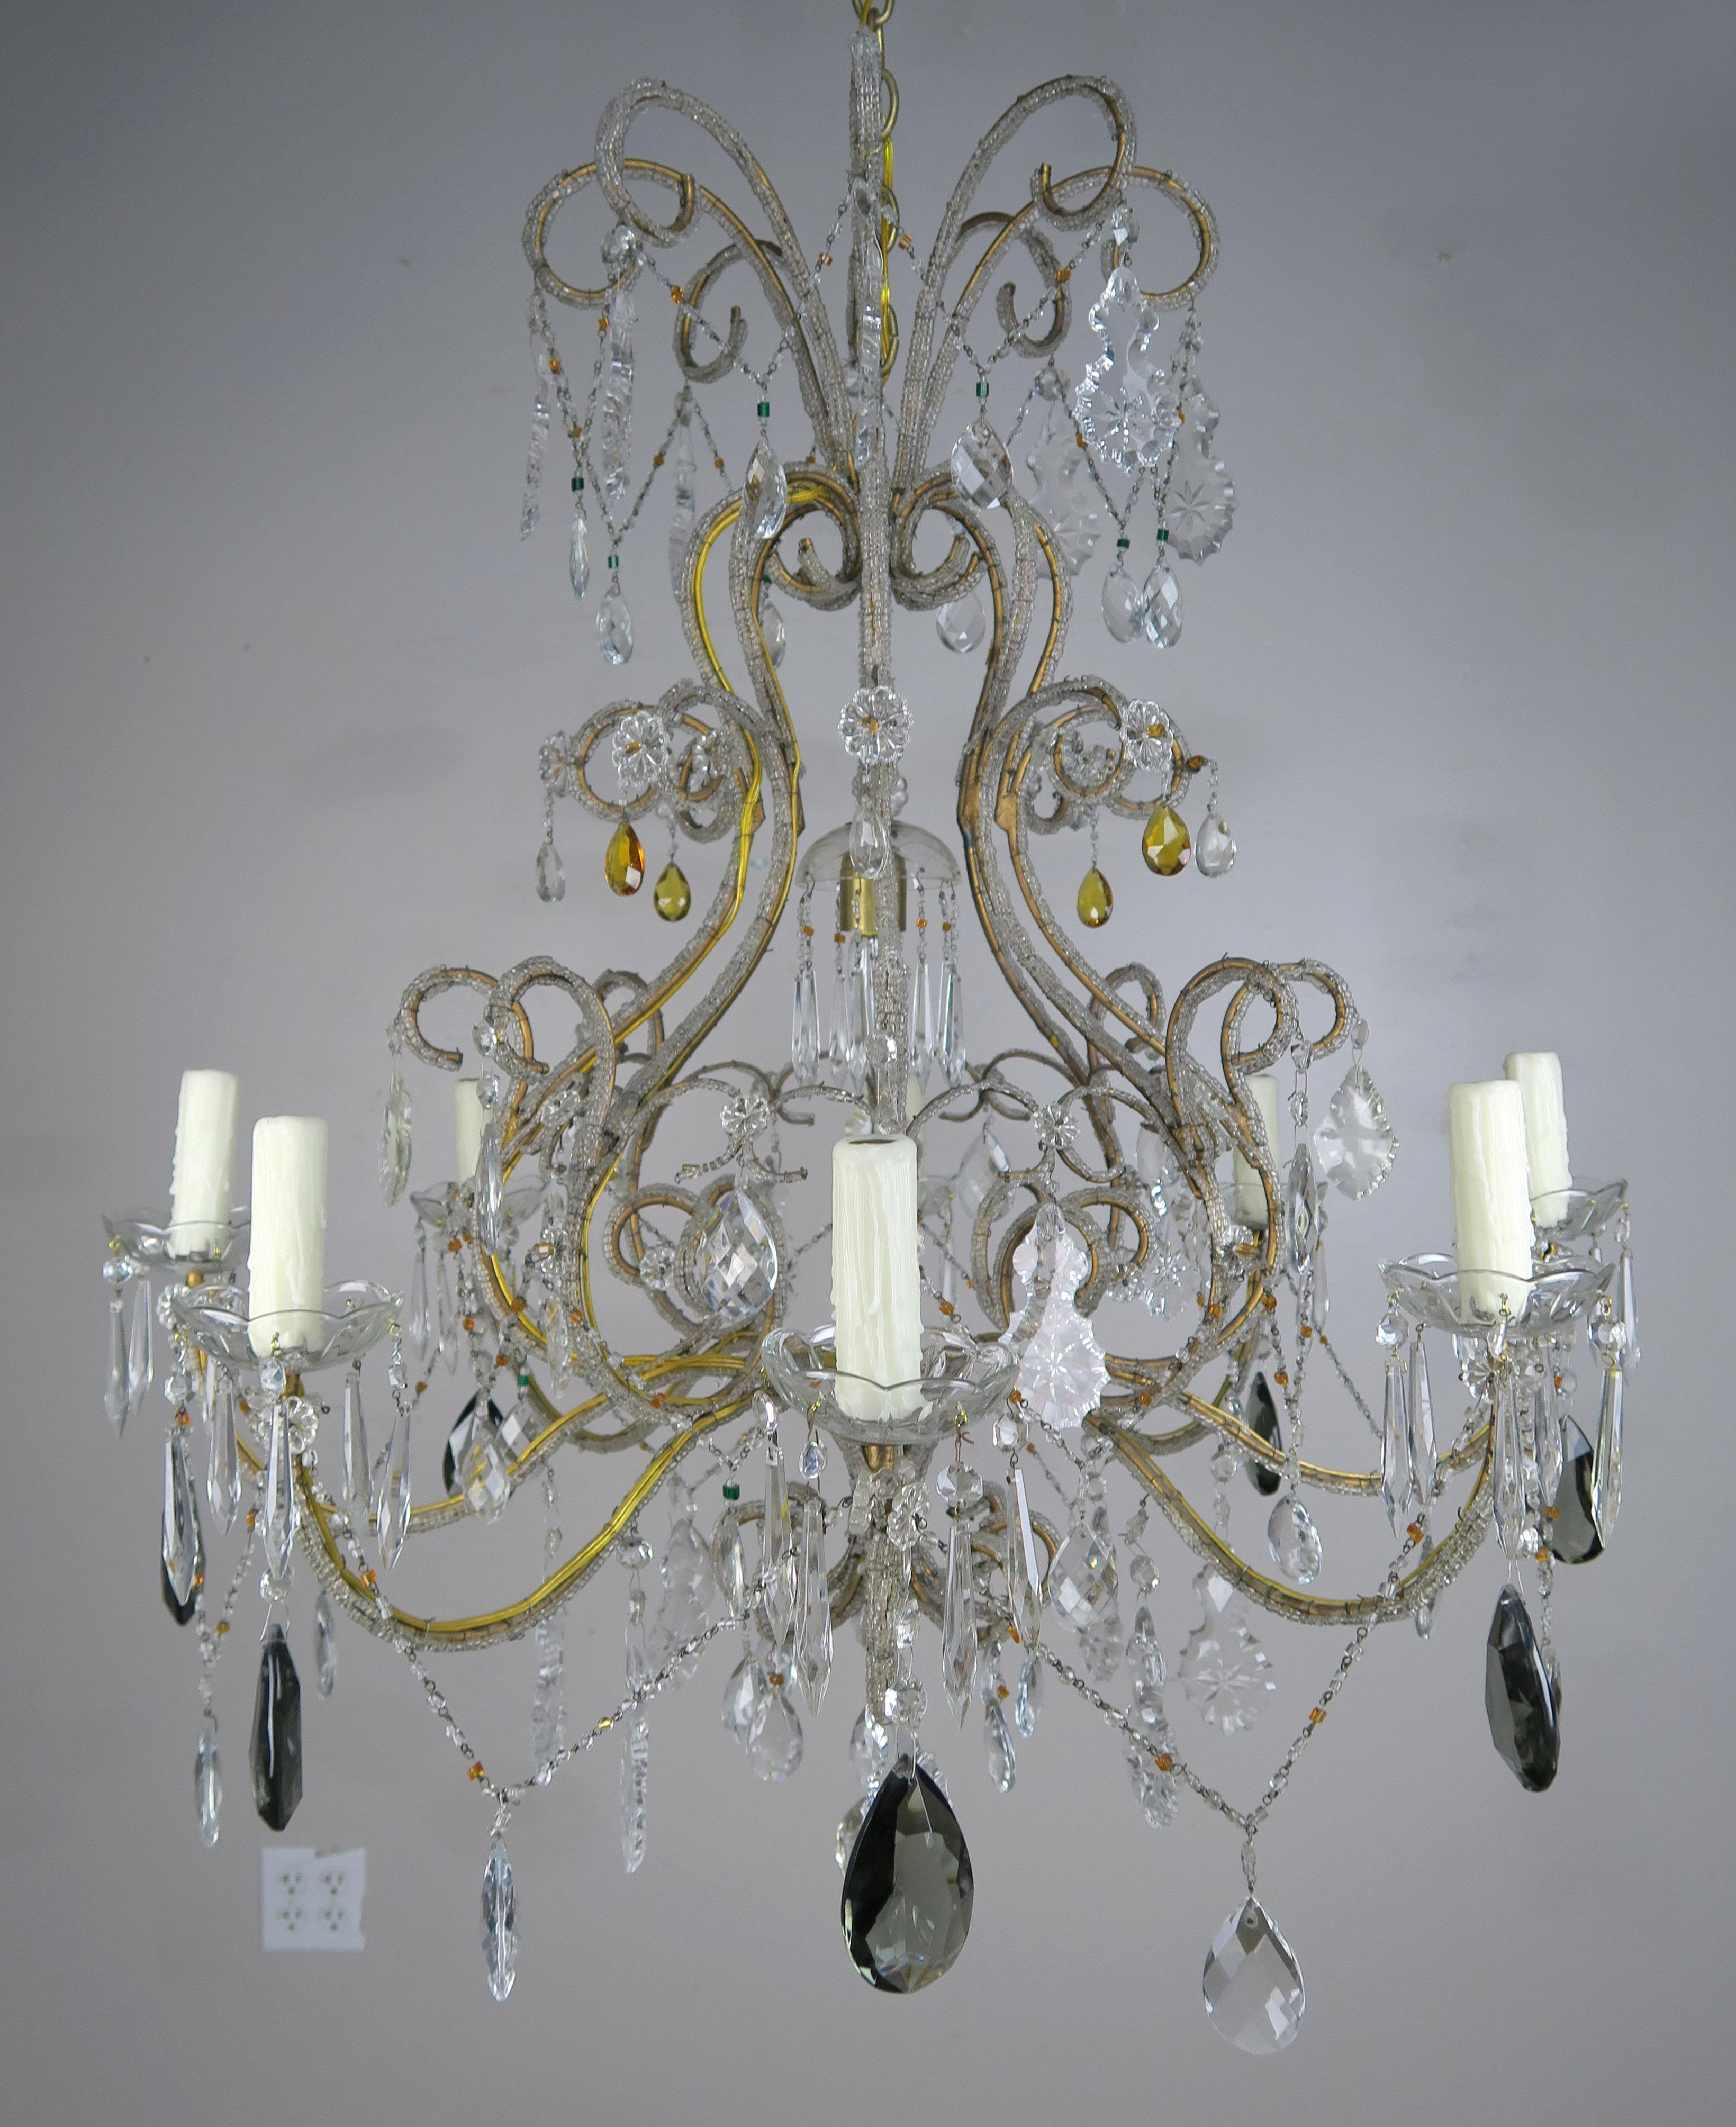 Eight light Italian crystal beaded arm chandelier with scrolled arms ending in drip wax candles. A large smokey crystal hangs from each arm and are combined with clear crystals throughout. The chandelier is newly rewired and includes chain and